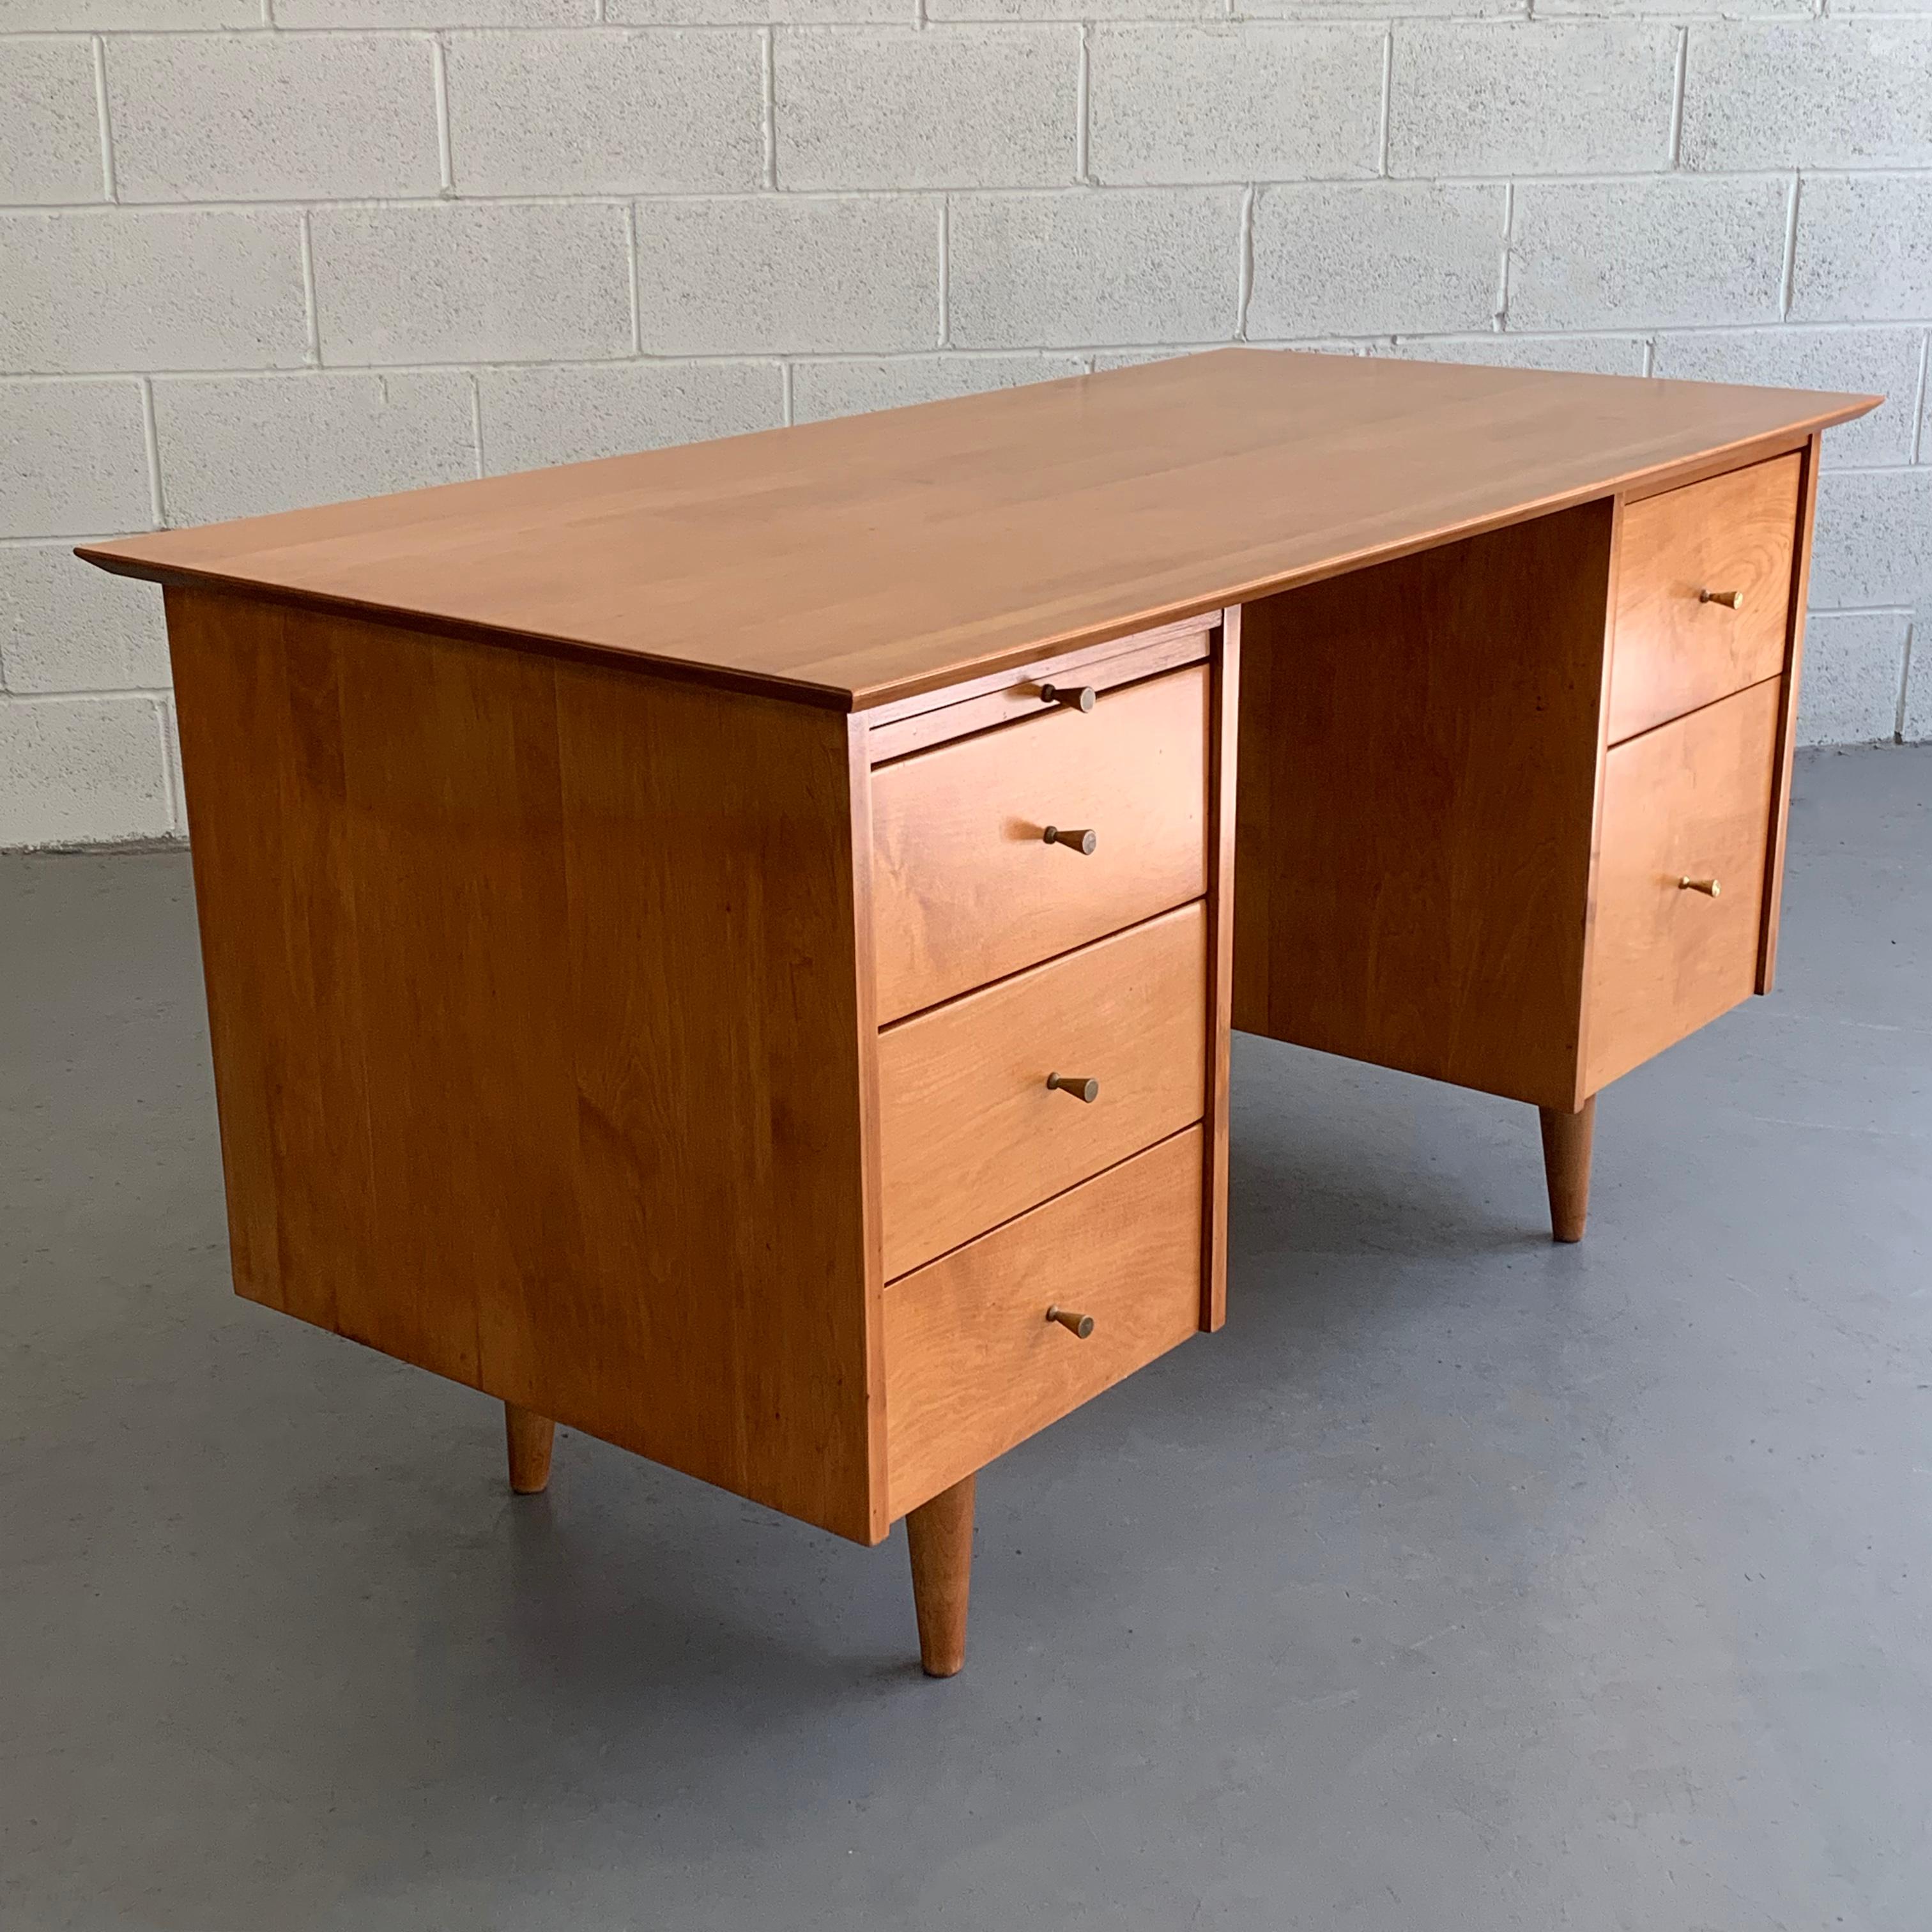 Mid-Century Modern, double pedestal, natural-tone, maple desk by Paul McCobb, Planner Group for Winchendon features drawers on both sides and pullout / pull-out ledge with signature McCobb brass hourglass pulls.